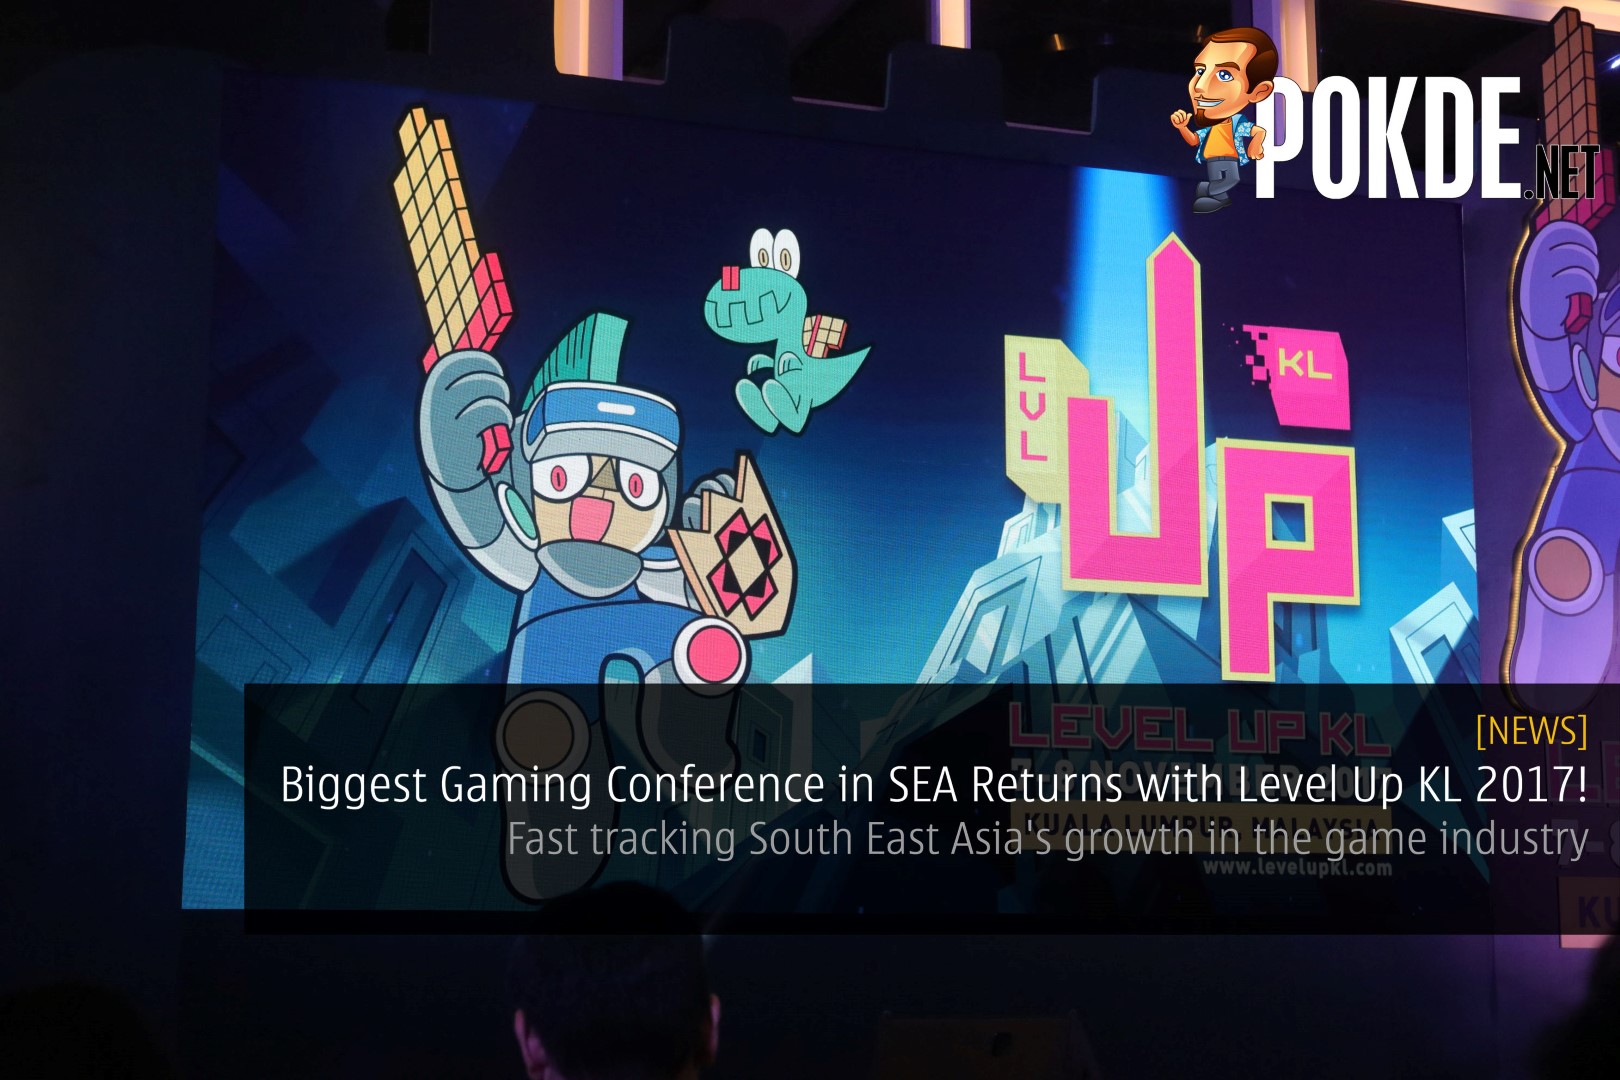 Biggest Gaming Conference in SEA Returns with Level Up KL 2017! - Fast tracking South East Asia's growth in the game industry 35